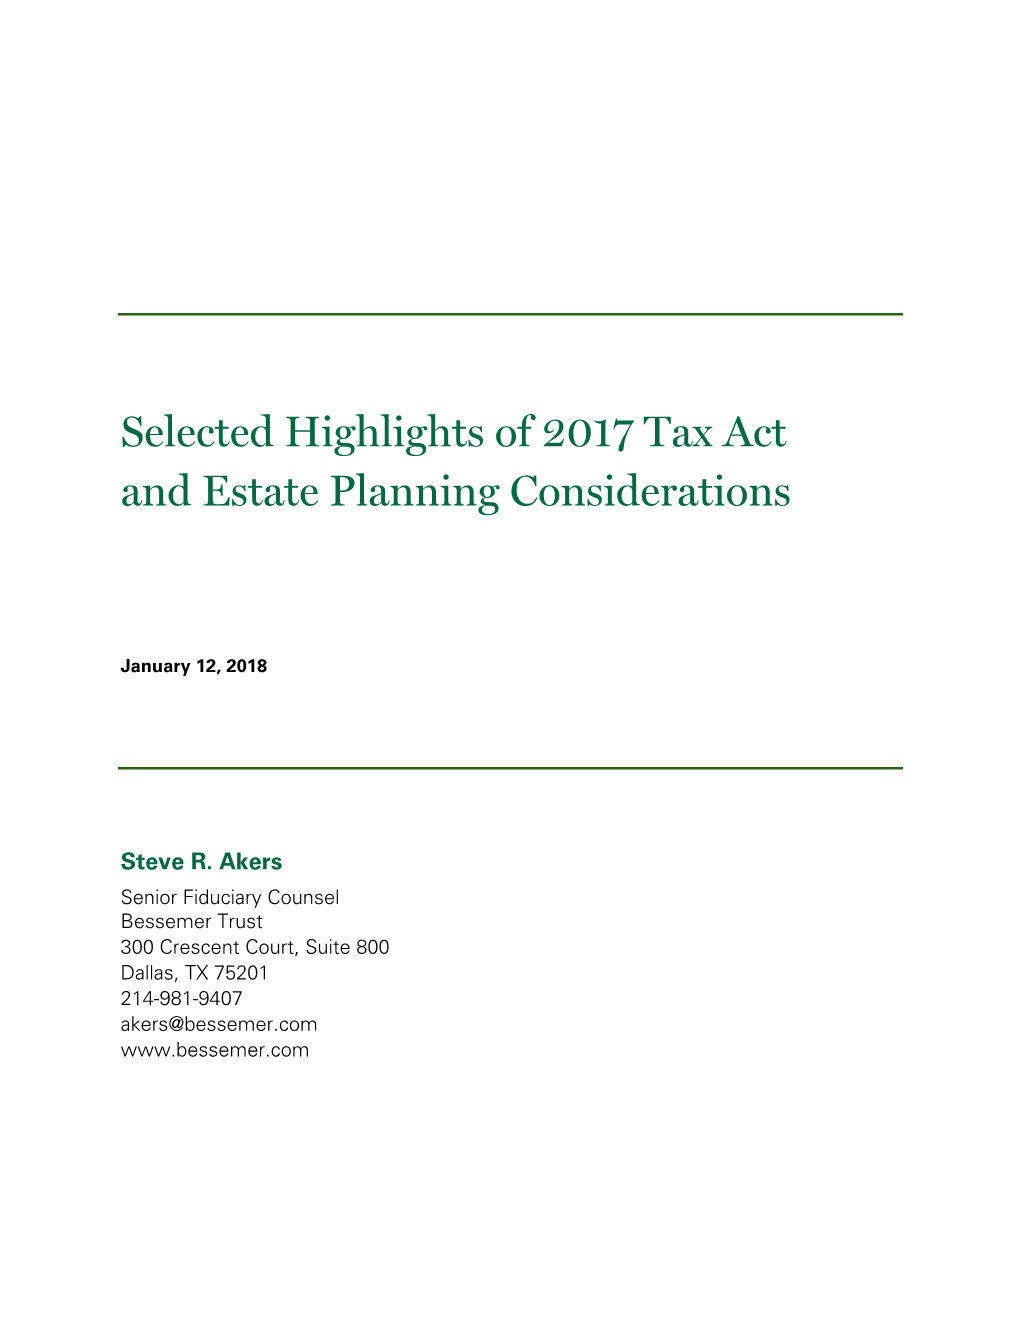 Selected Highlights of 2017 Tax Act and Estate Planning Considerations